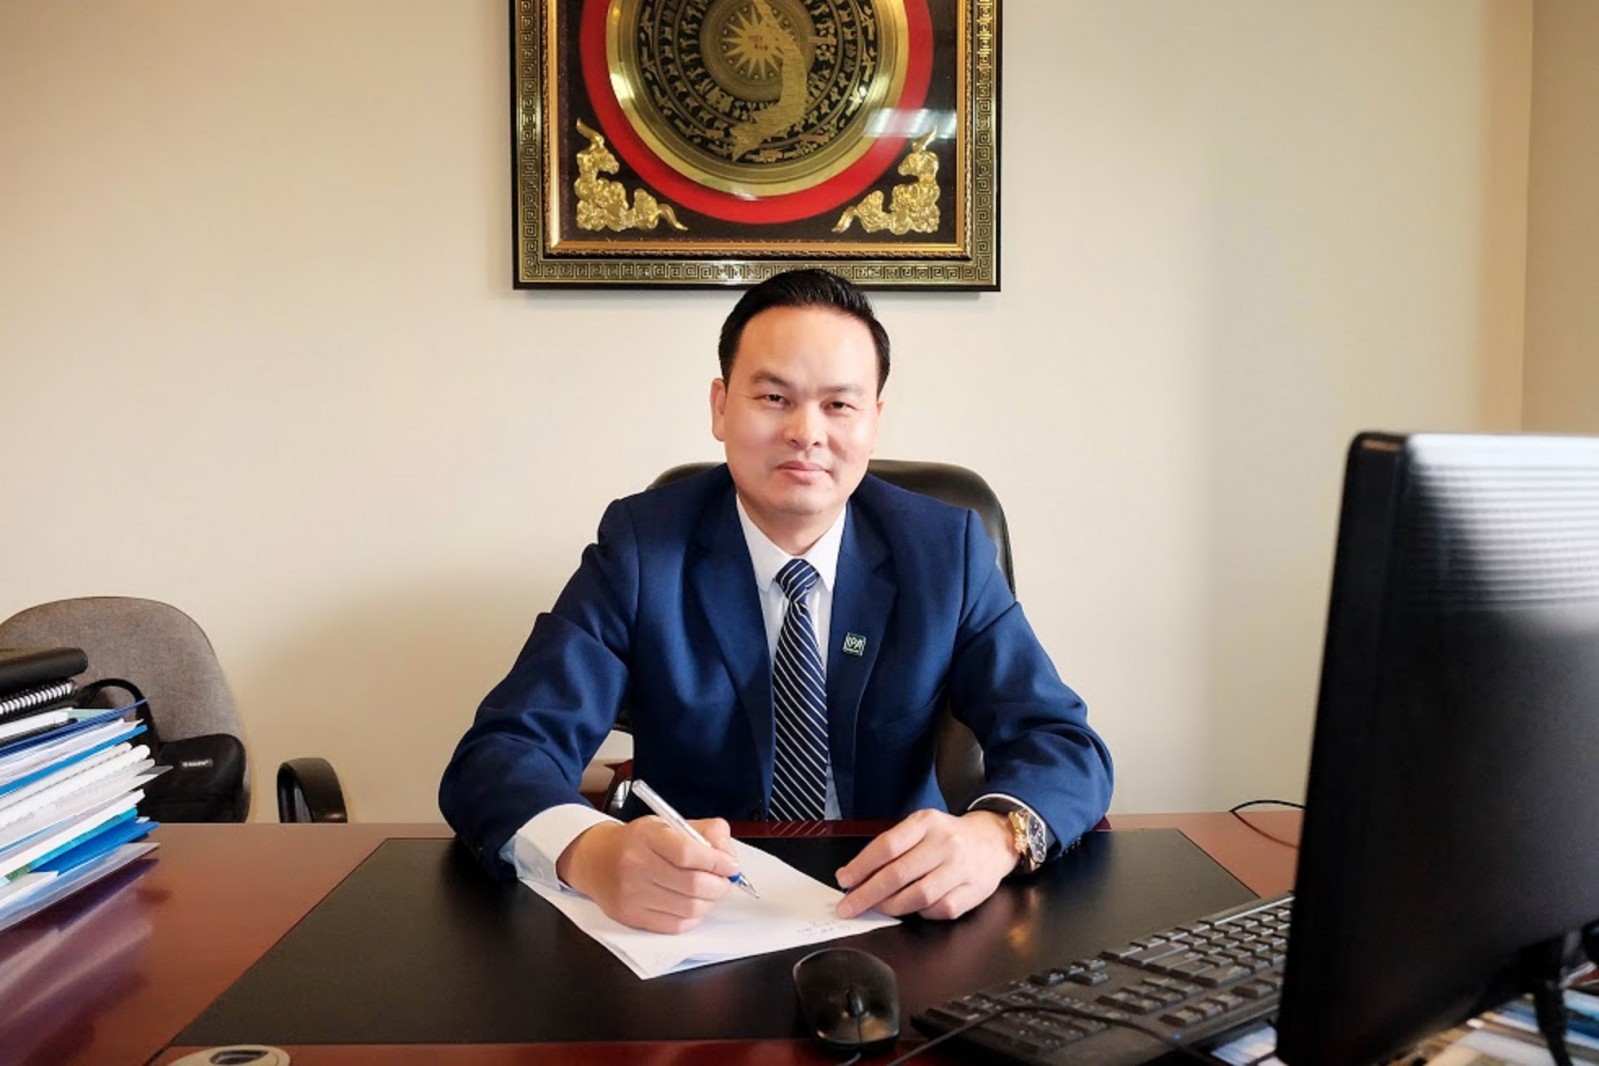 Mr. Truong Manh Hung, Permanent Vice Director of Quang Ninh Investment Promotion Agency.